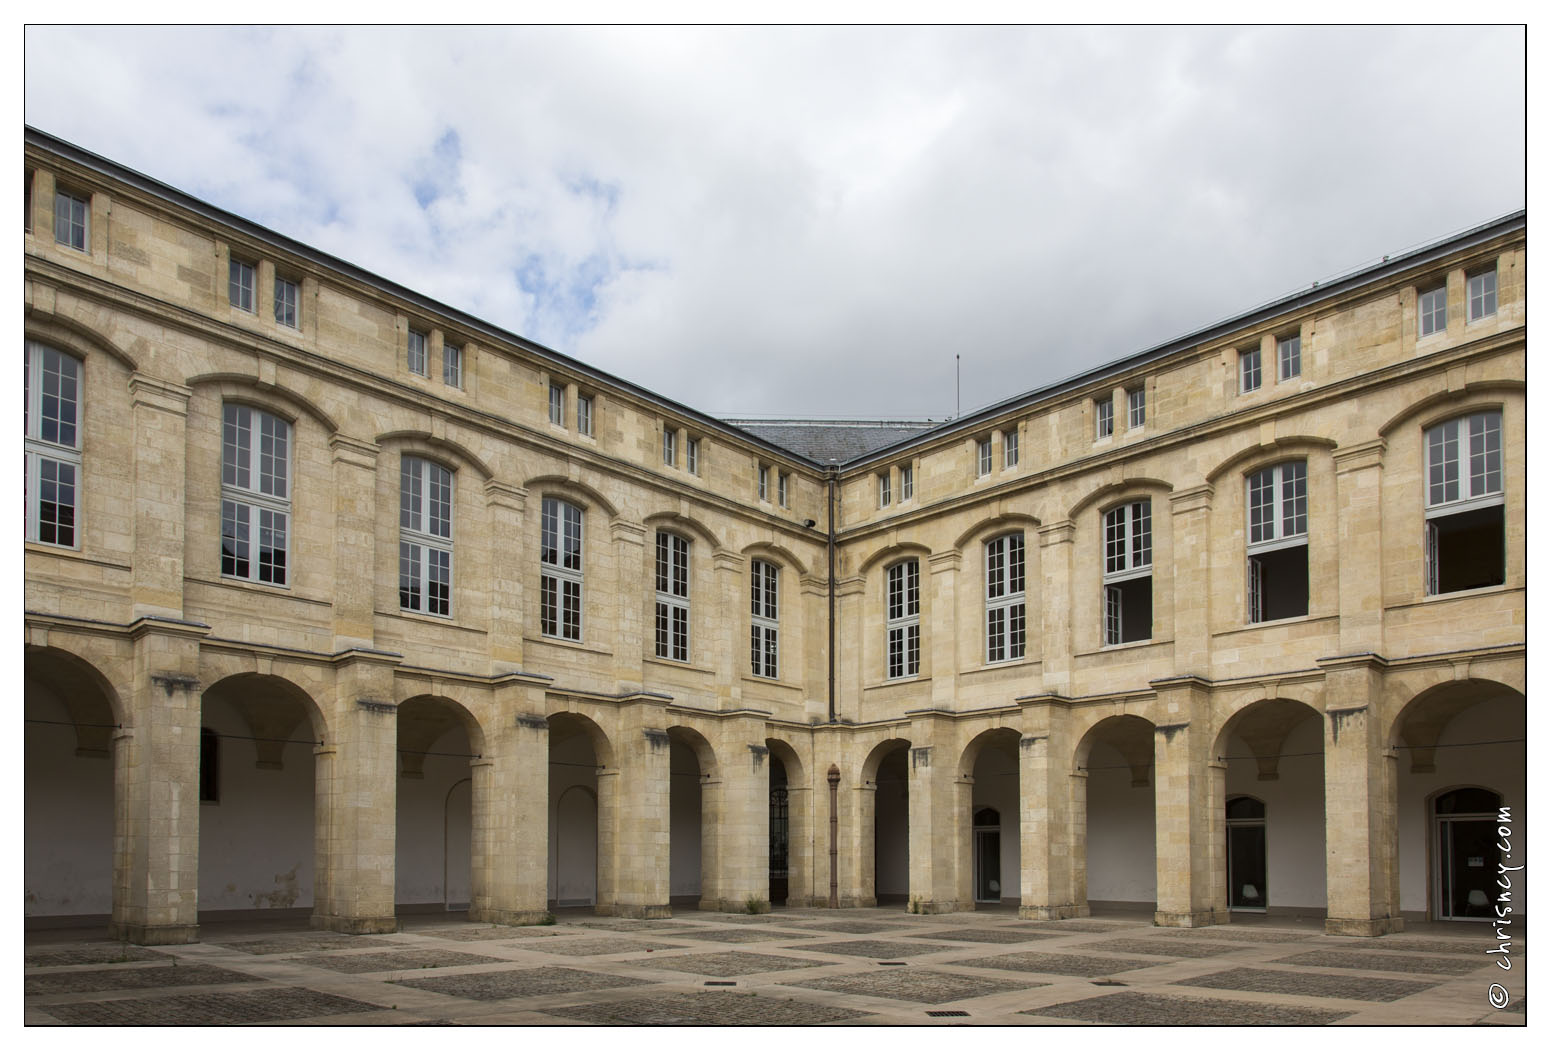 20140828-033_5721-Bordeaux_Cours_Mably.jpg